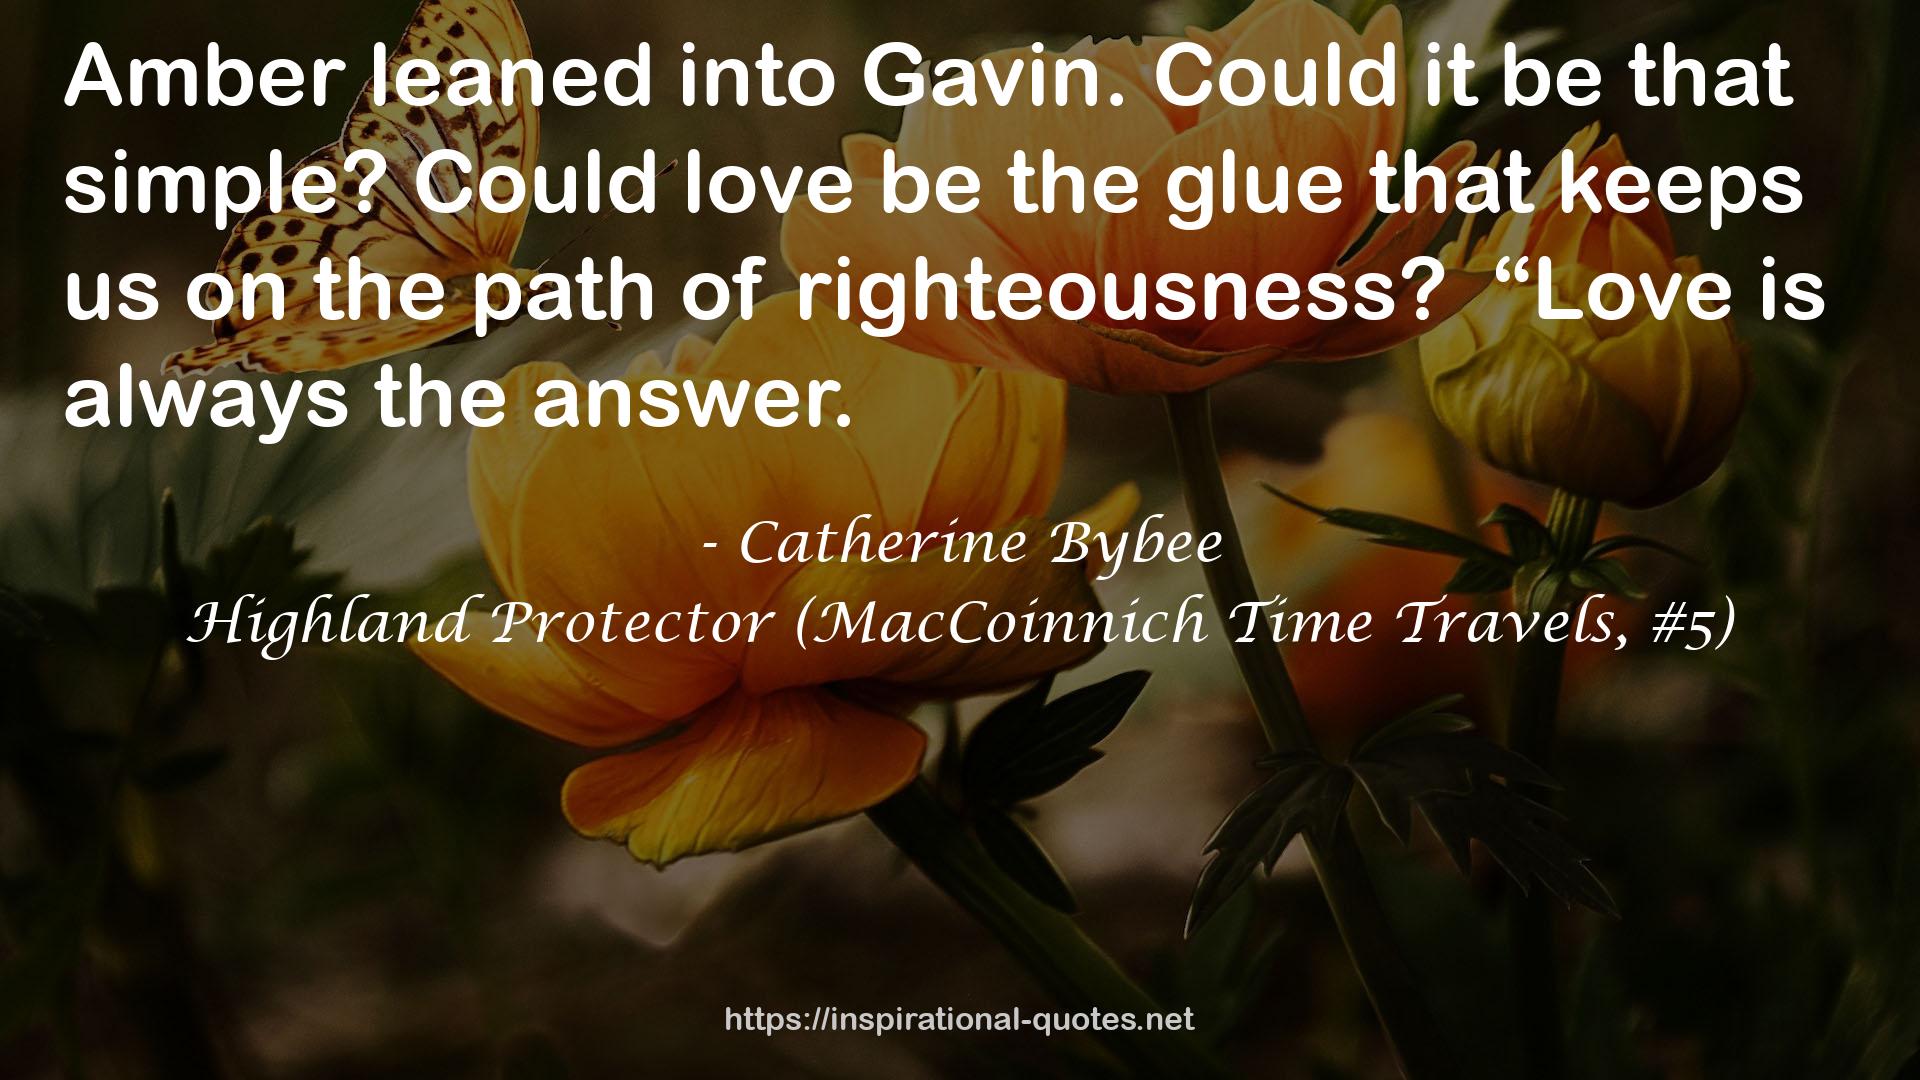 Highland Protector (MacCoinnich Time Travels, #5) QUOTES